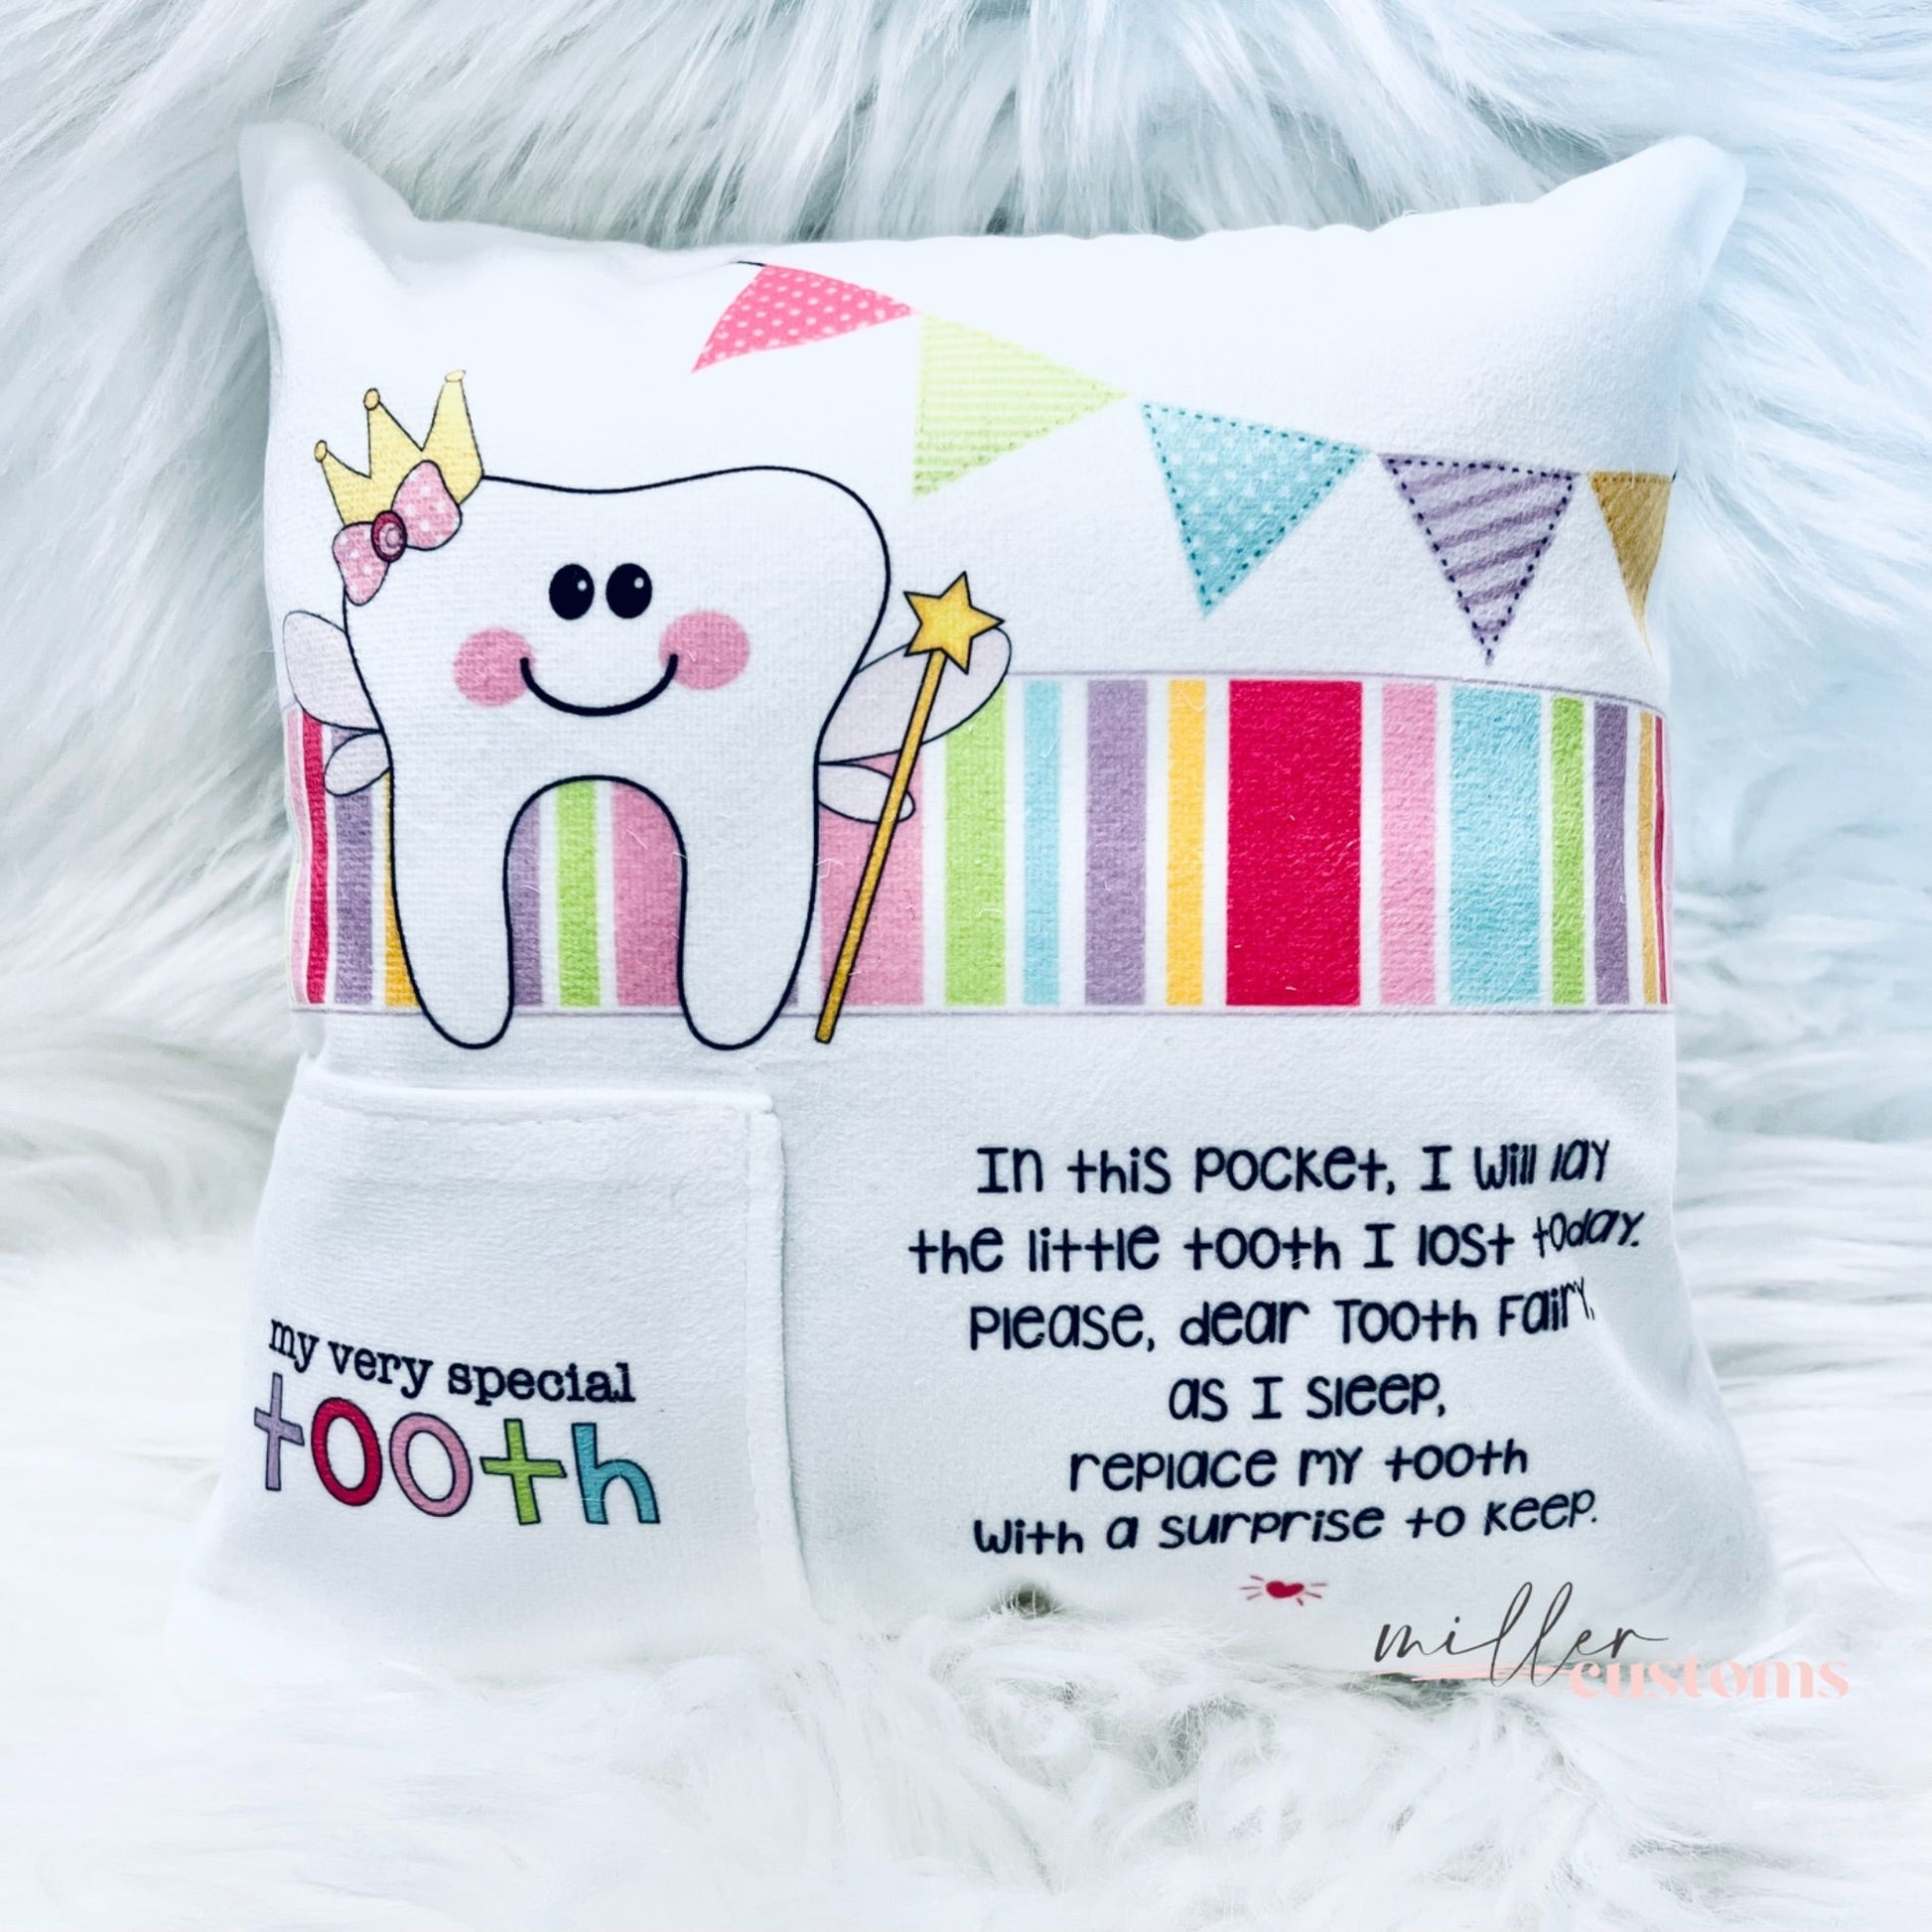 060-010 - Tooth Fairy Pillow - 4